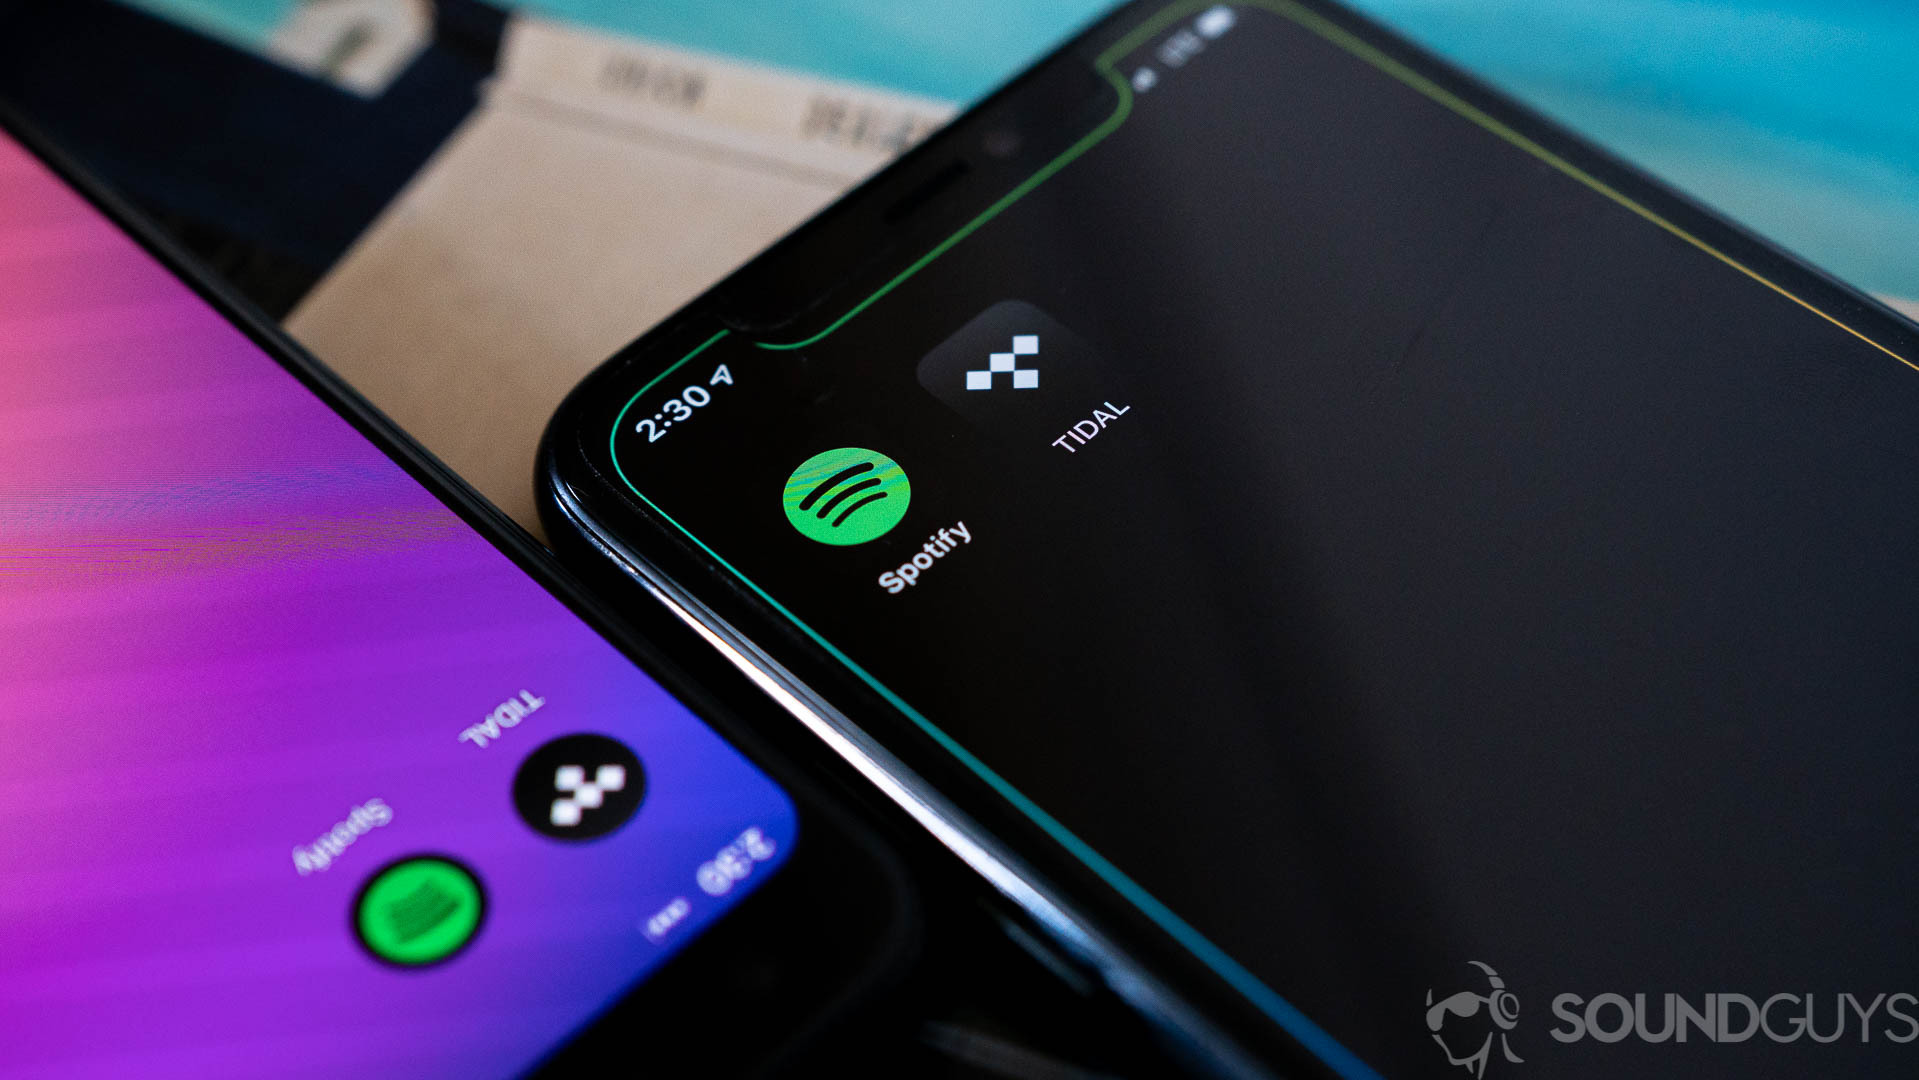 Spotify and Tidal's app icons on two smartphones